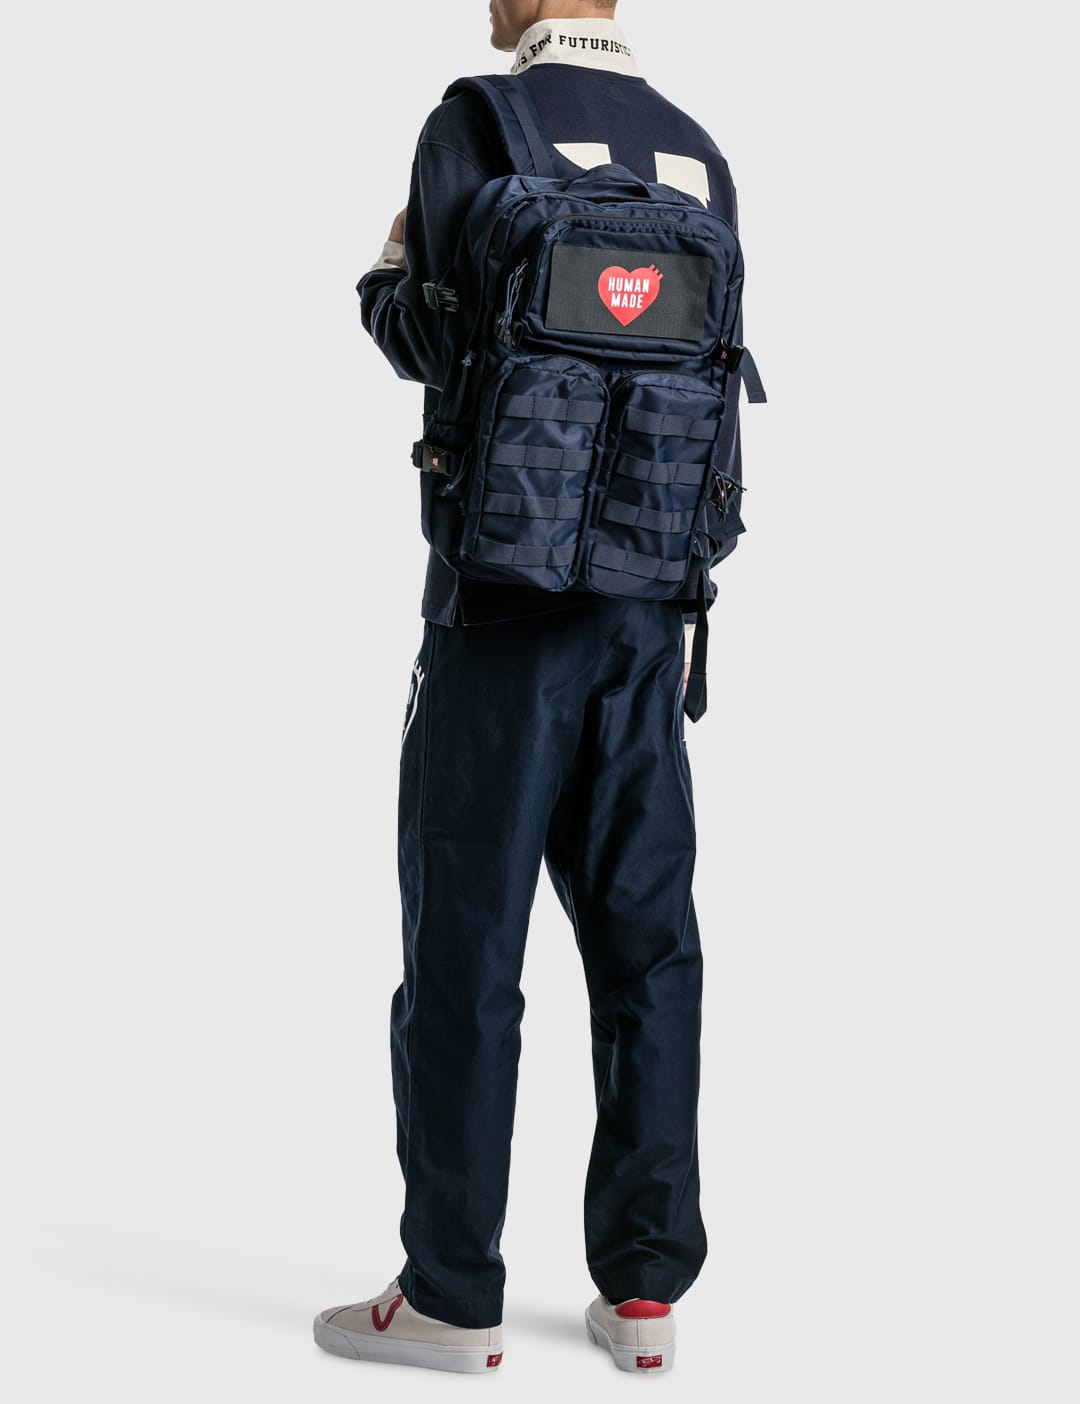 Human Made - Military Backpack | HBX - Globally Curated Fashion 